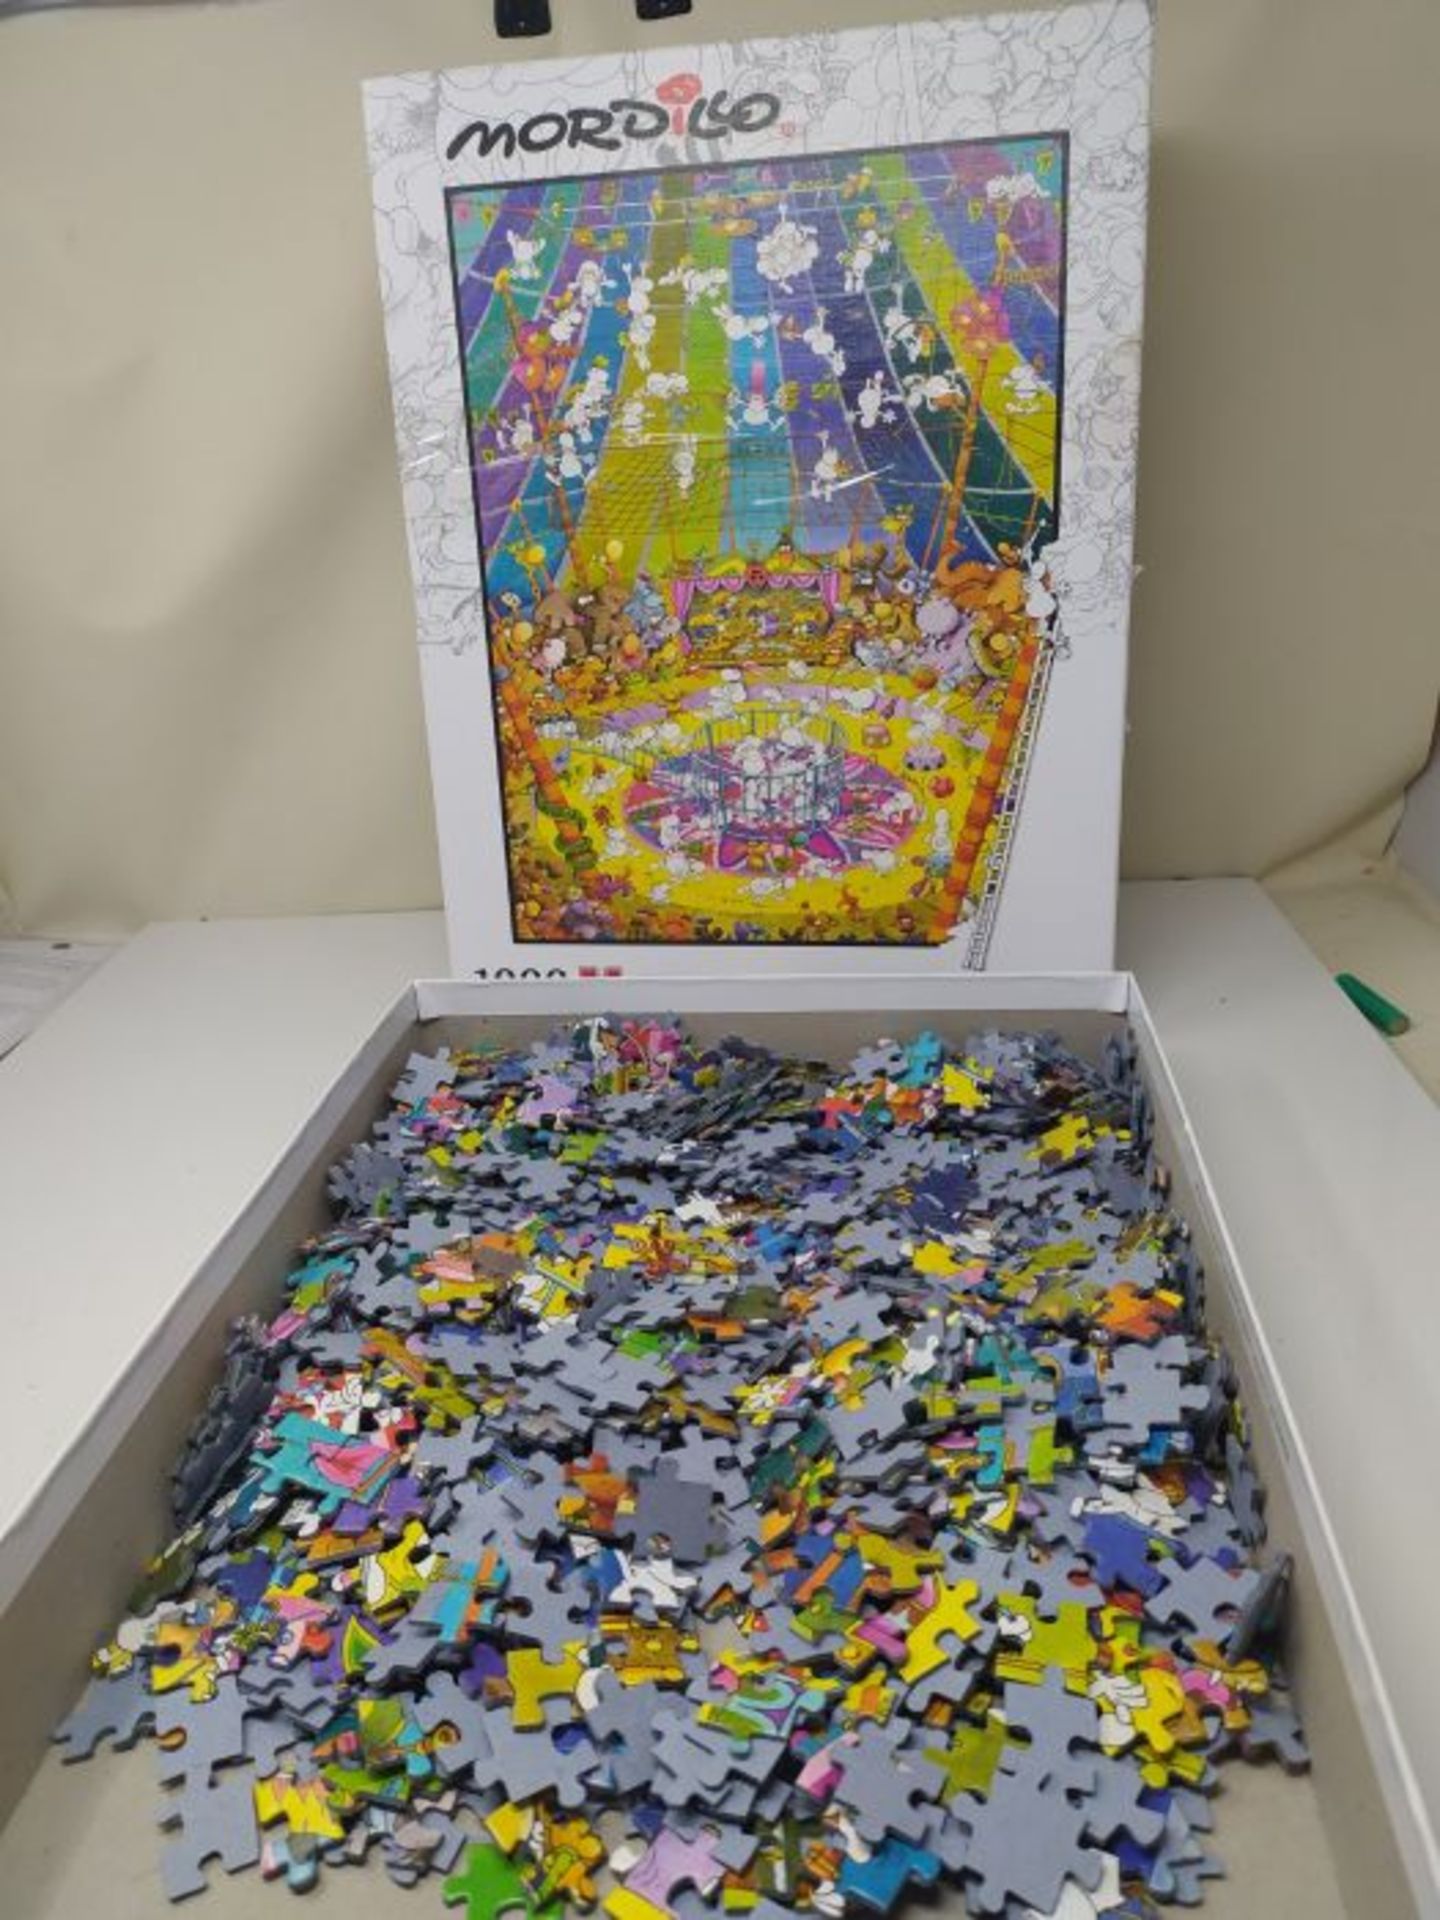 Clementoni - 39536 - Mordillo Puzzle - The Show - 1000 pieces - Made in Italy - jigsaw - Image 2 of 2